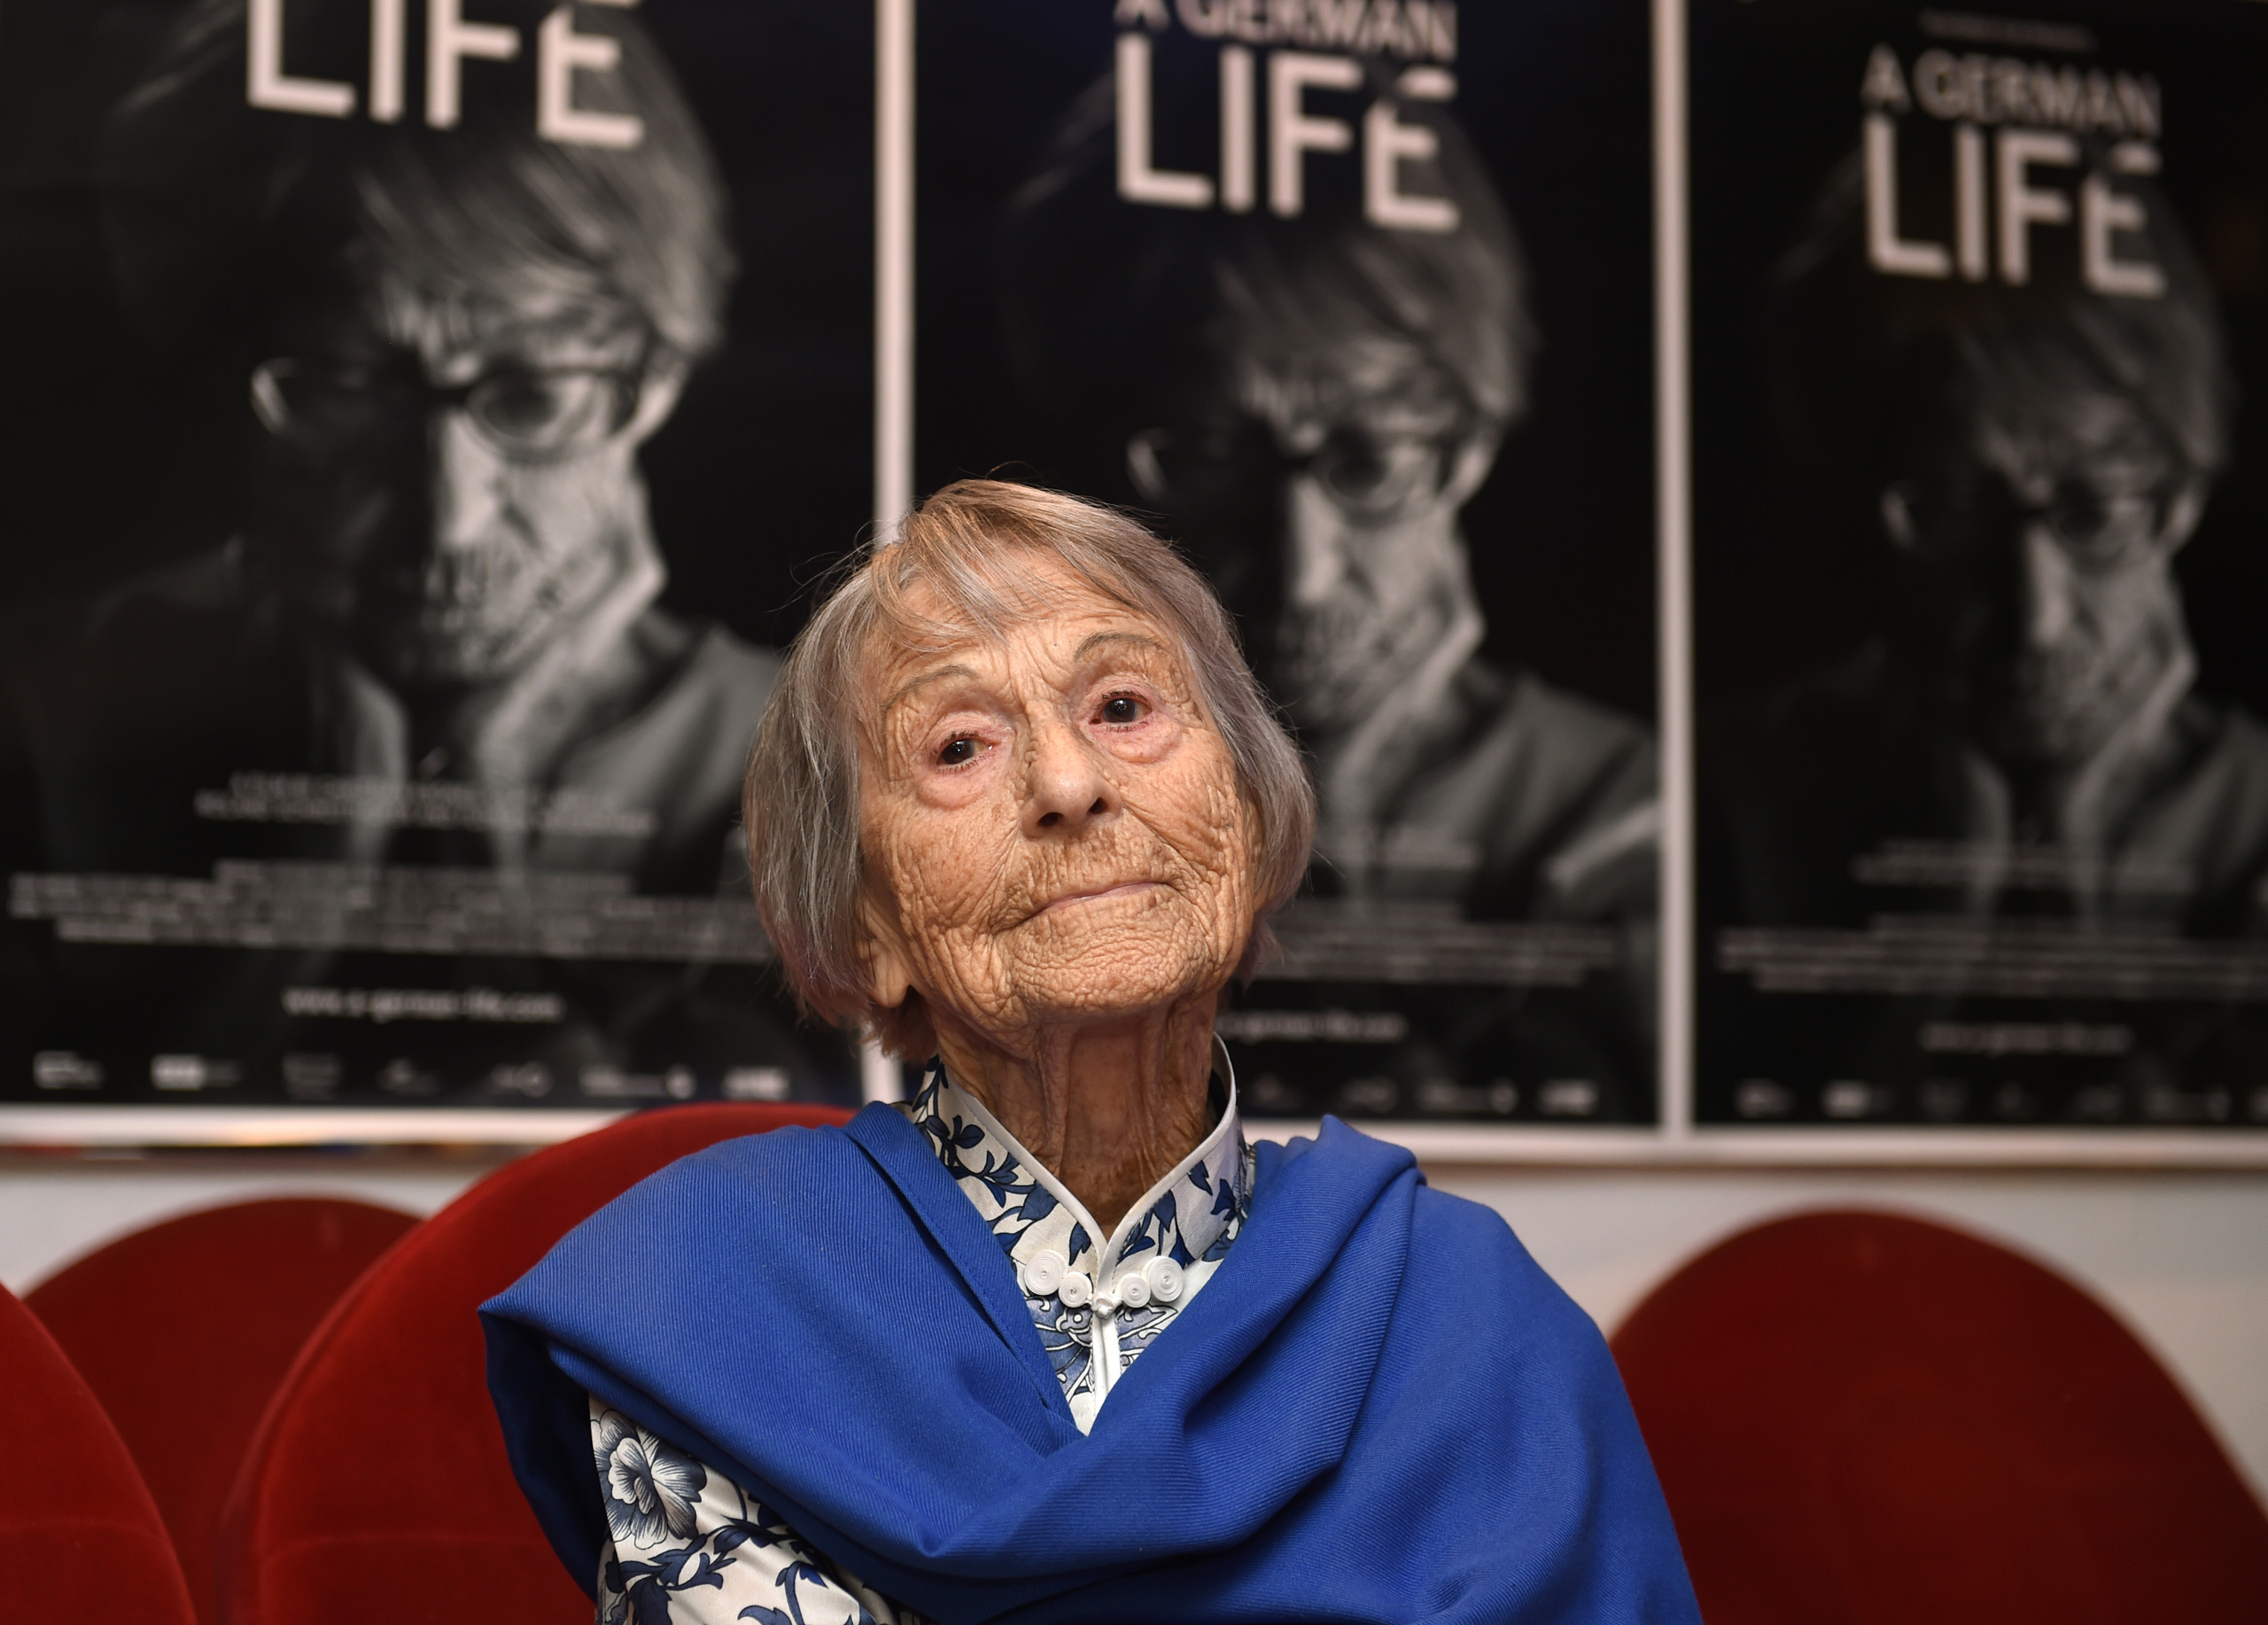 Brunhilde Pomsel, former secretary of Nazi propaganda chief Joseph Goebbels, sits on a cinema chair in front of posters for the movie 